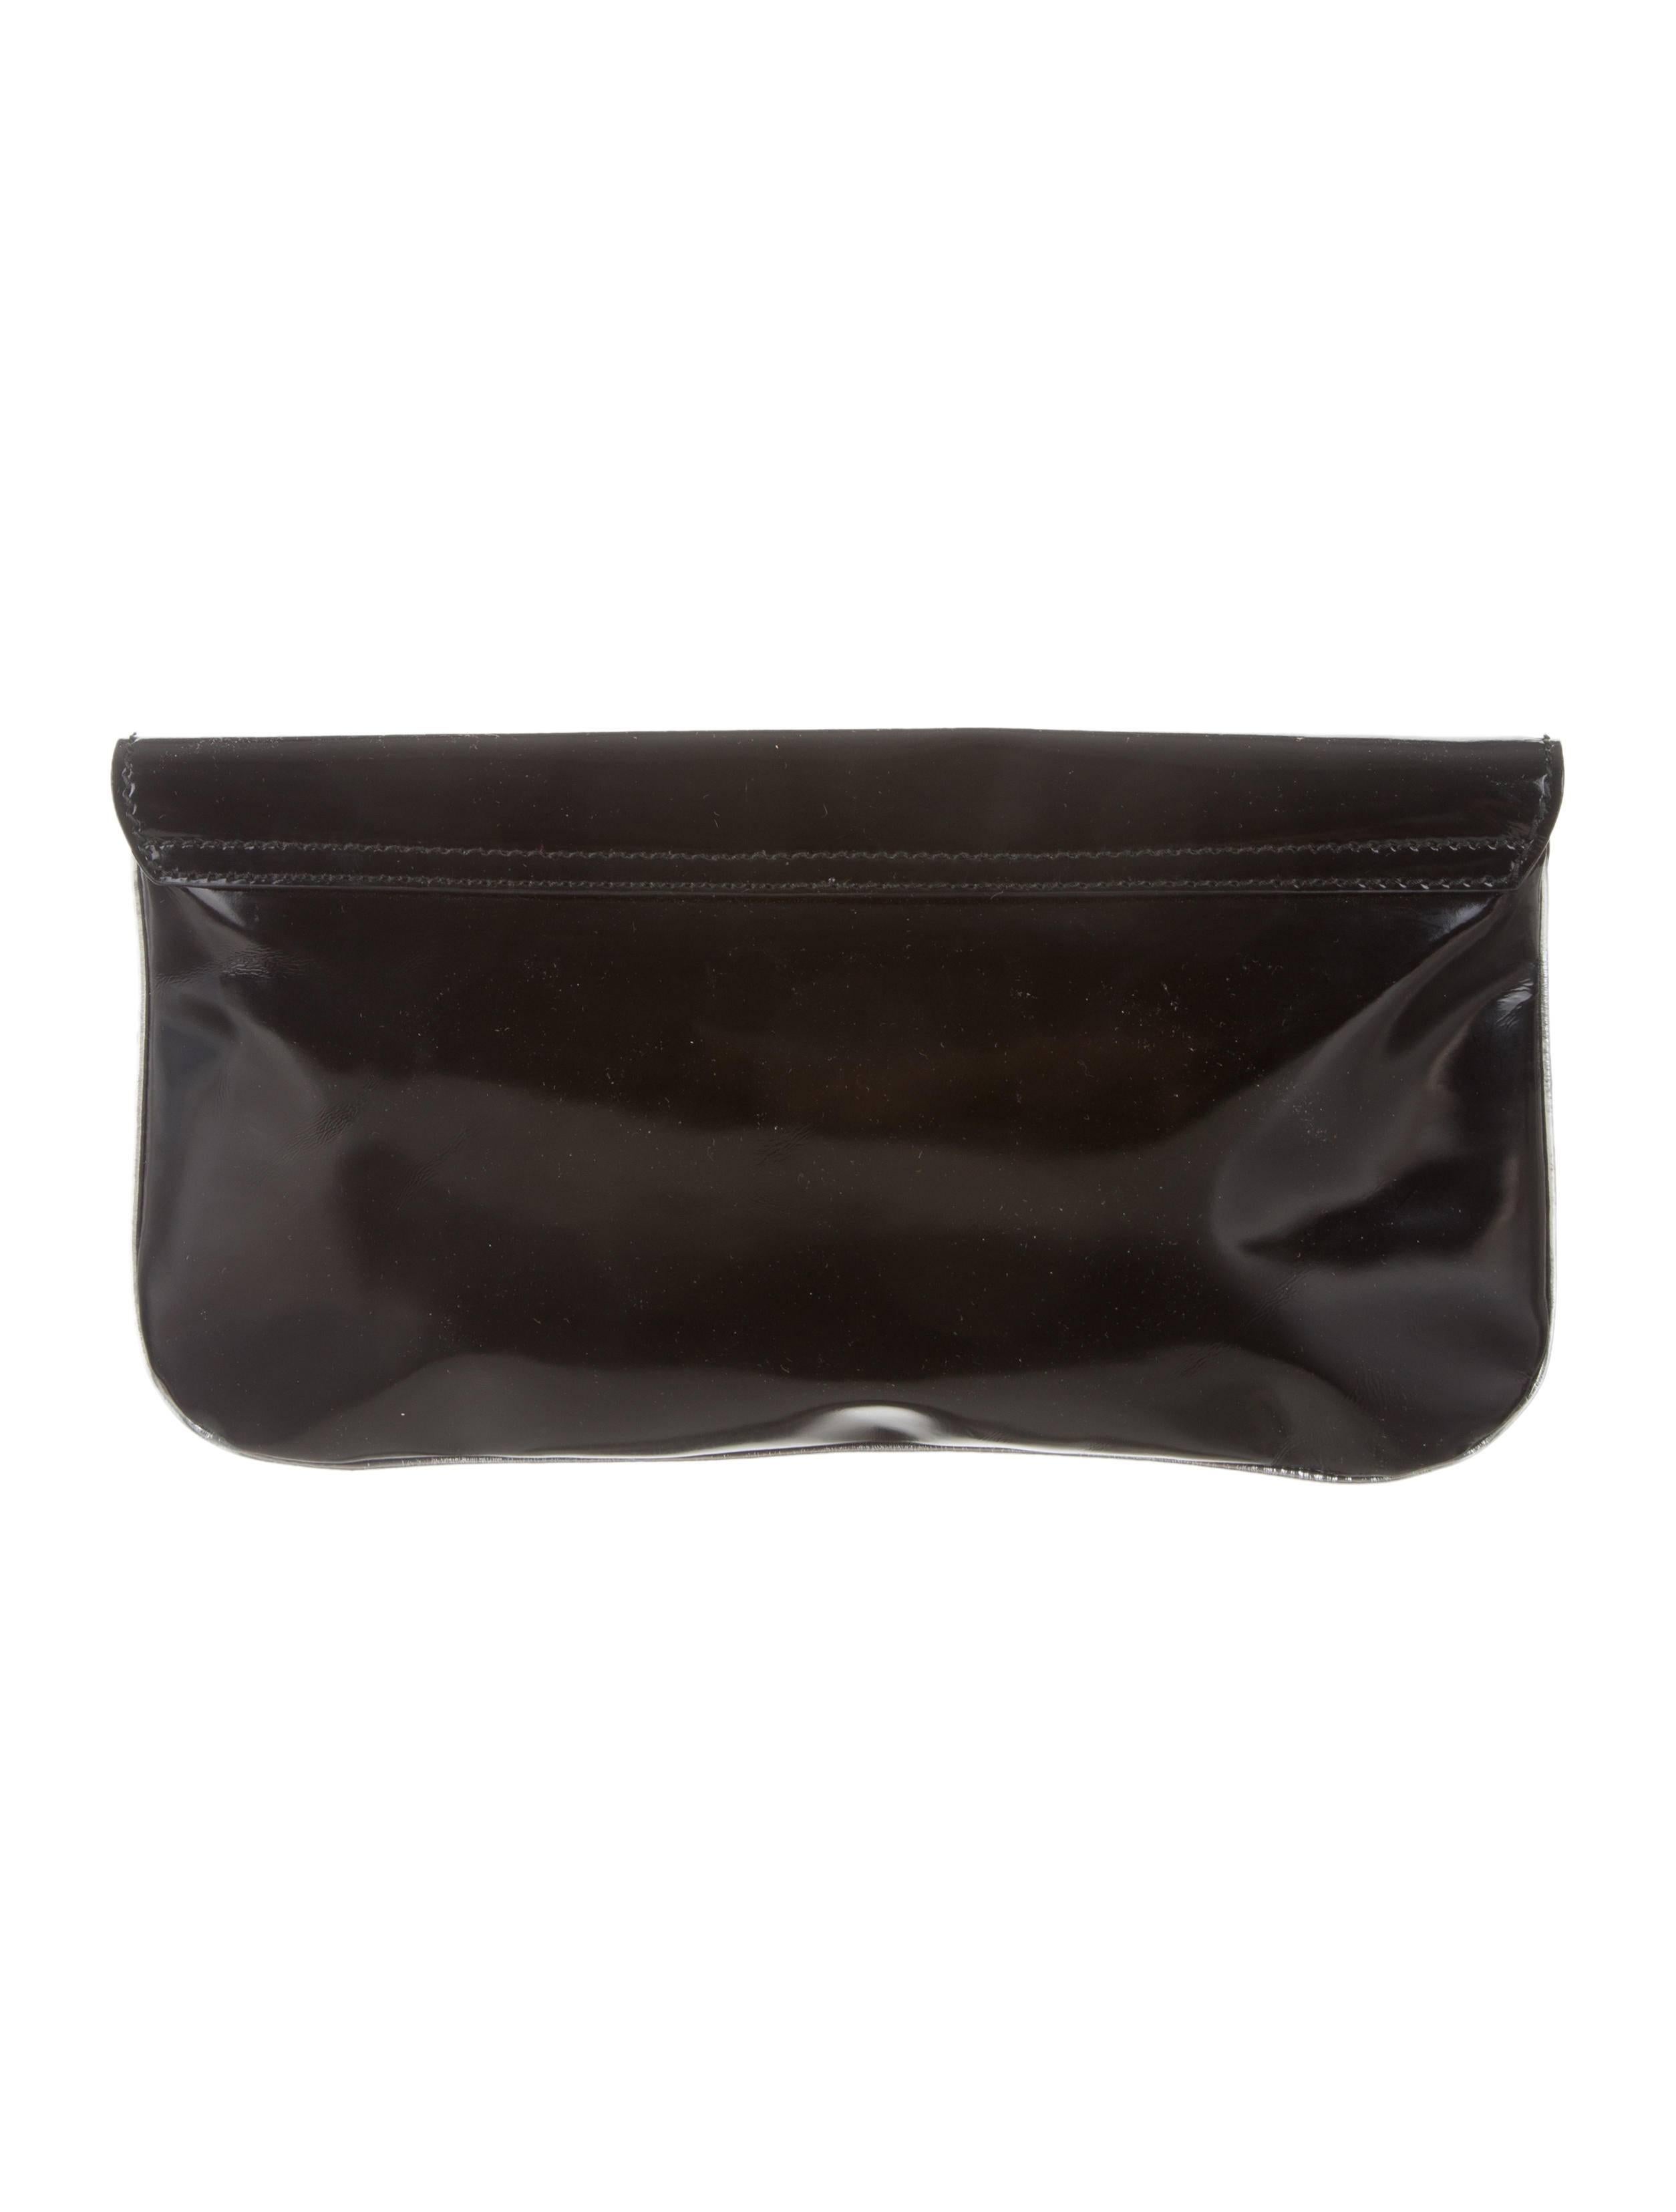 Balenciaga Black Patent Leather Silver Accent Envelope Flap Evening Clutch Bag In Good Condition In Chicago, IL